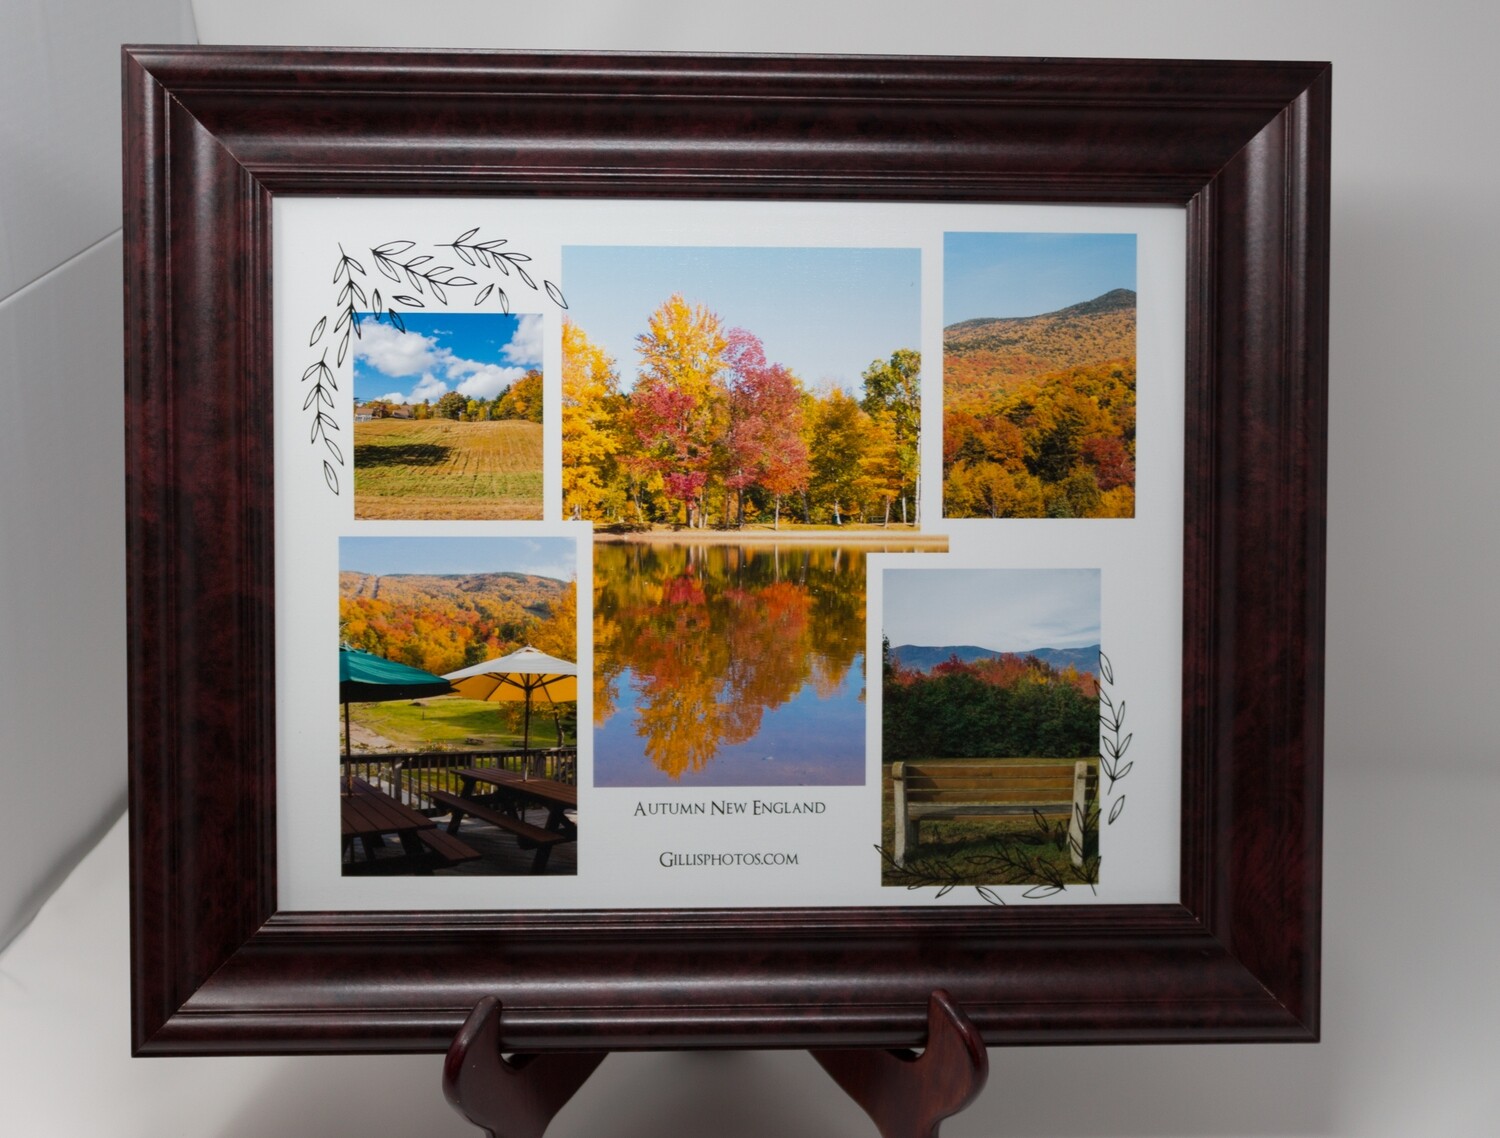 11"x 14" Framed Photo Collage of Images of the Fall Season From Around New England​